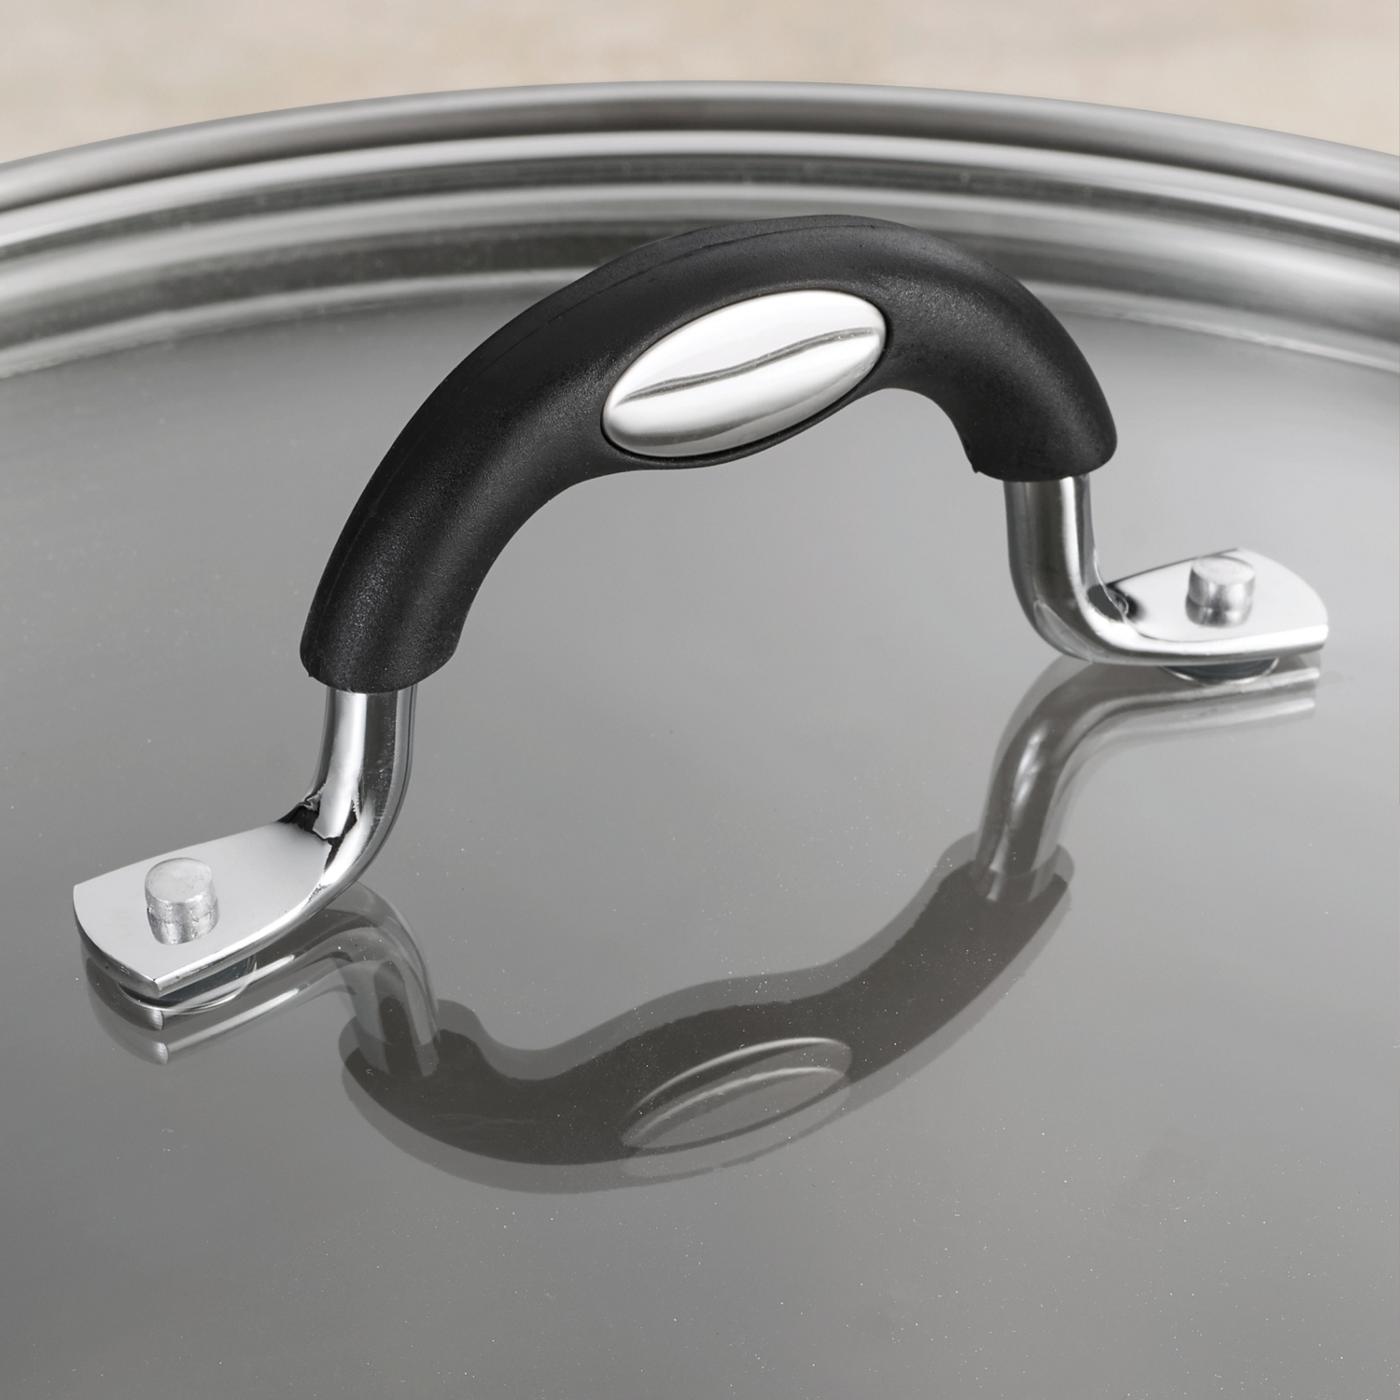 Tramontina Stainless Steel Stock Pot with Glass Lid; image 6 of 6